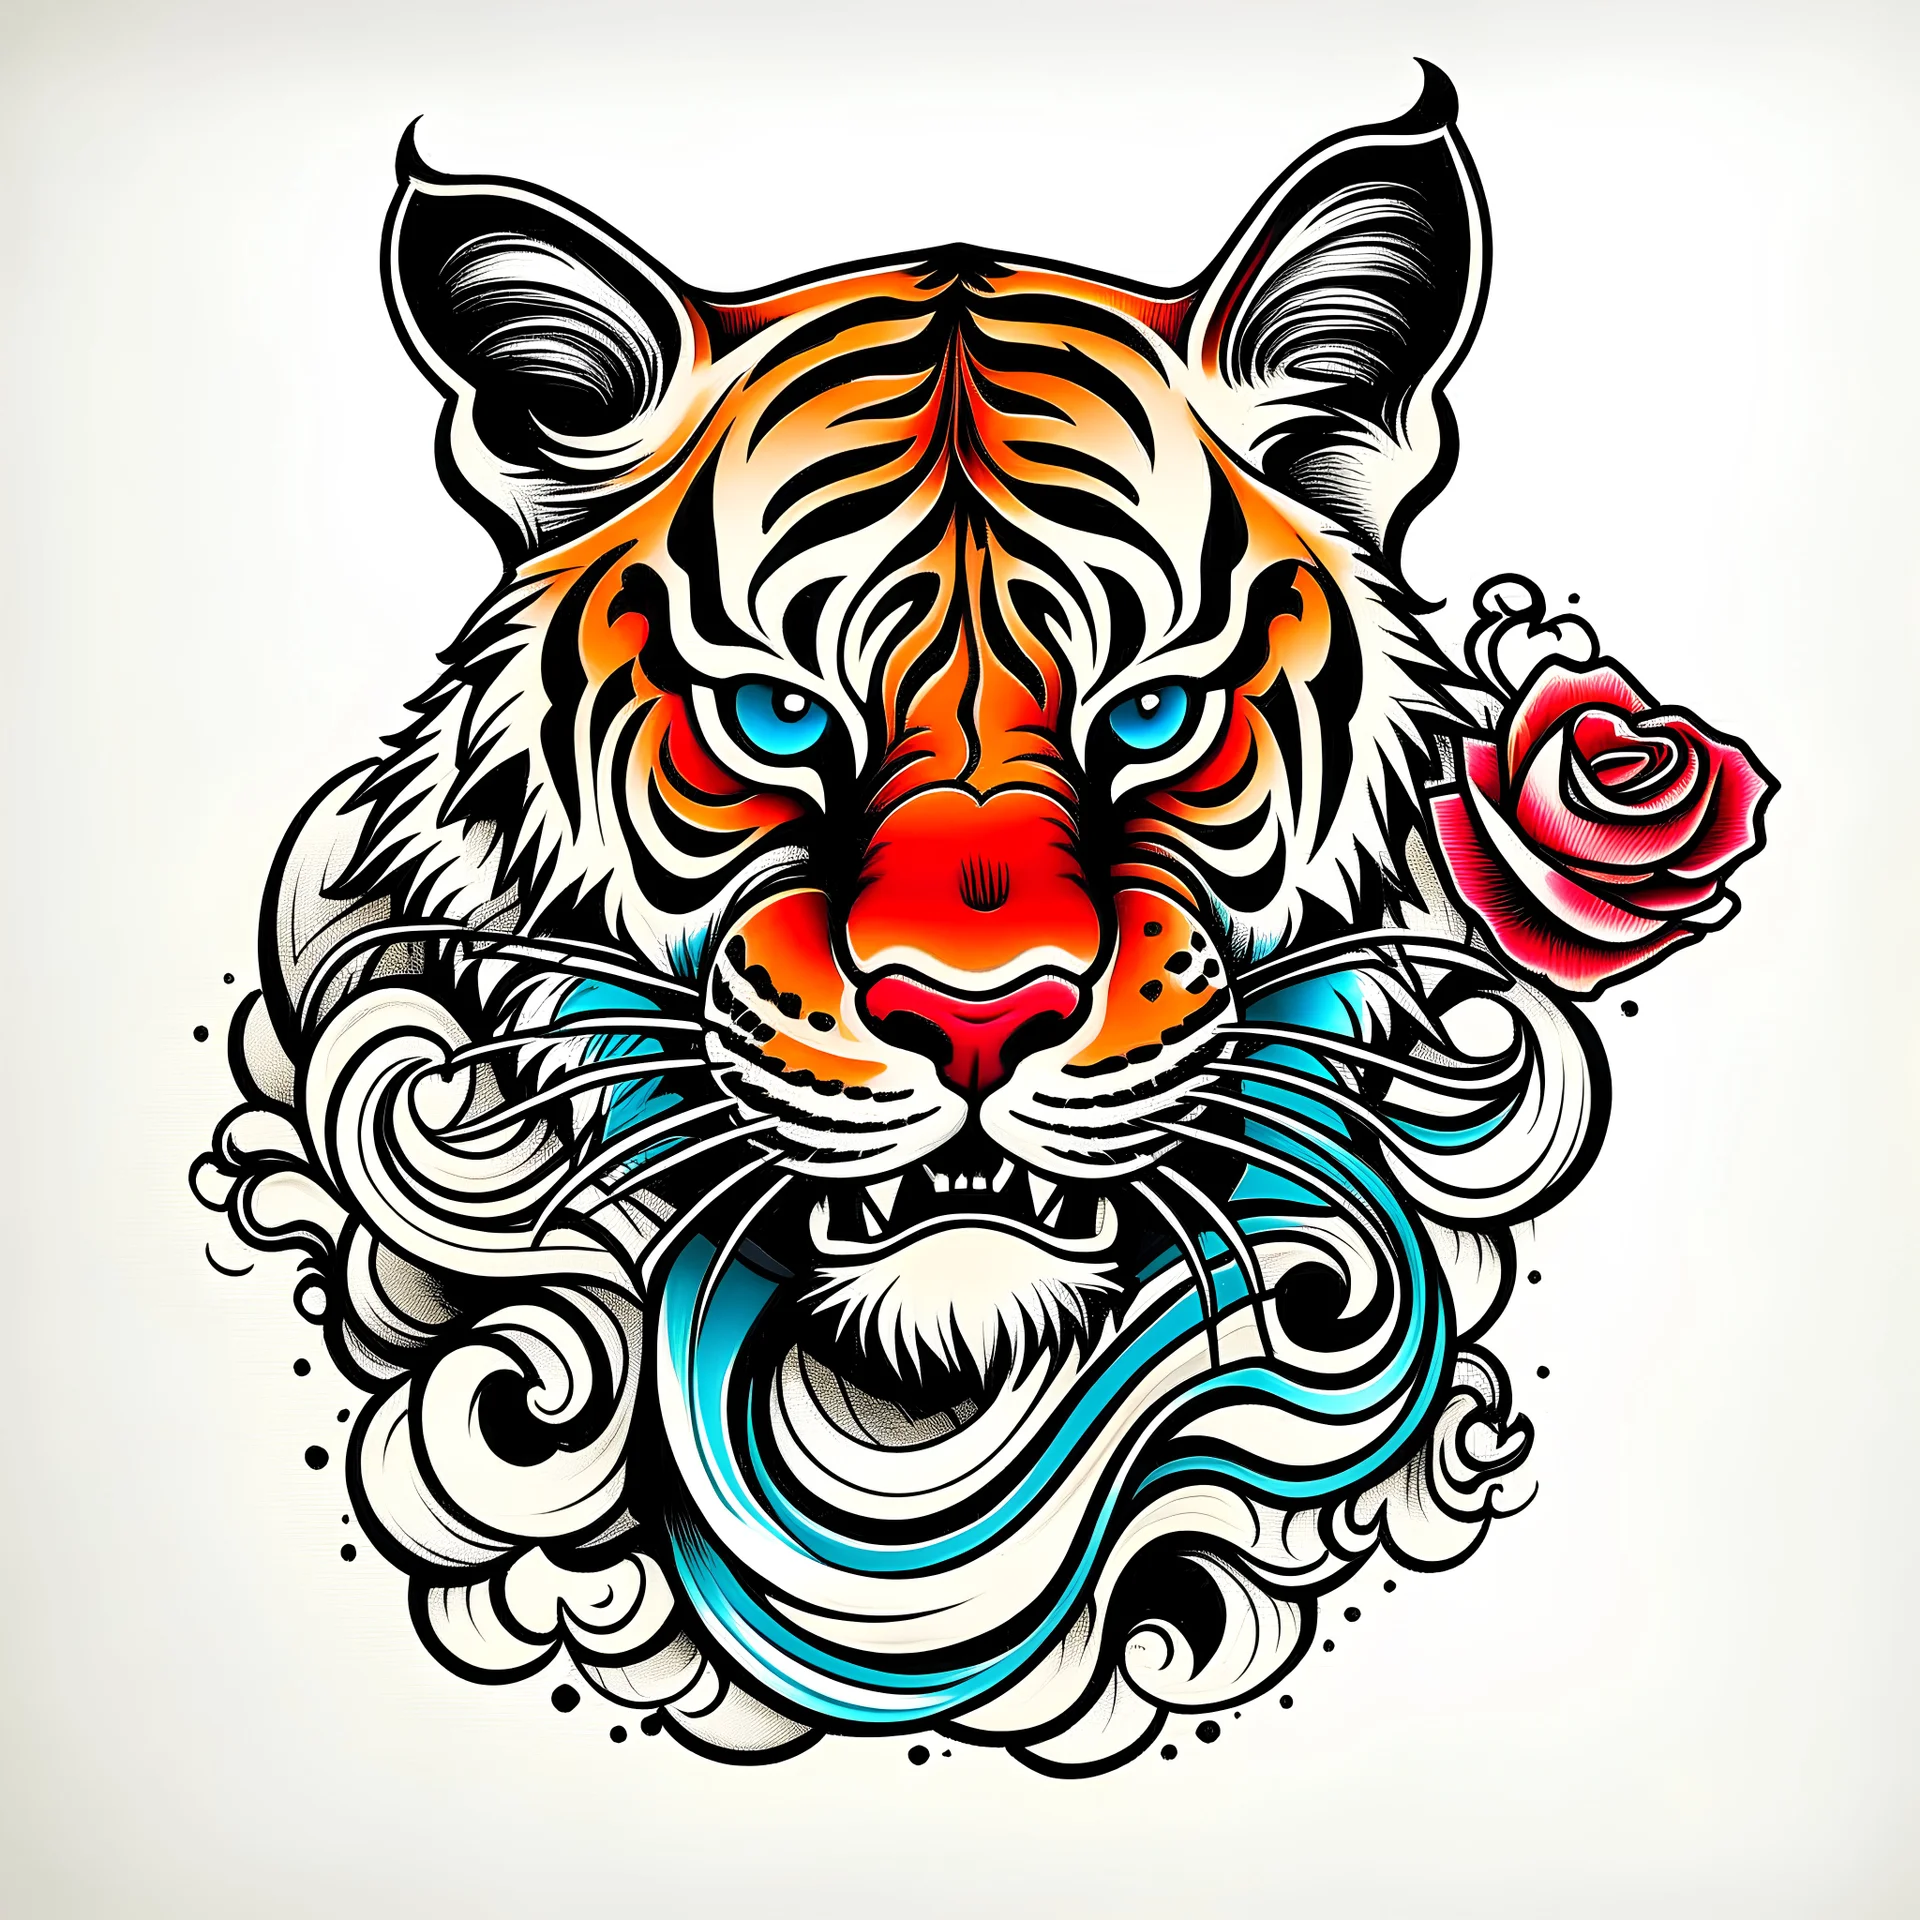 a modern tattoo design, old school style, thick black lines, on a plain white background, featuring a japanese tiger as the main element, minimal style, vibrant saturated color palette, Hand drawn aesthetic, old school style with hints of American traditional tattoo style